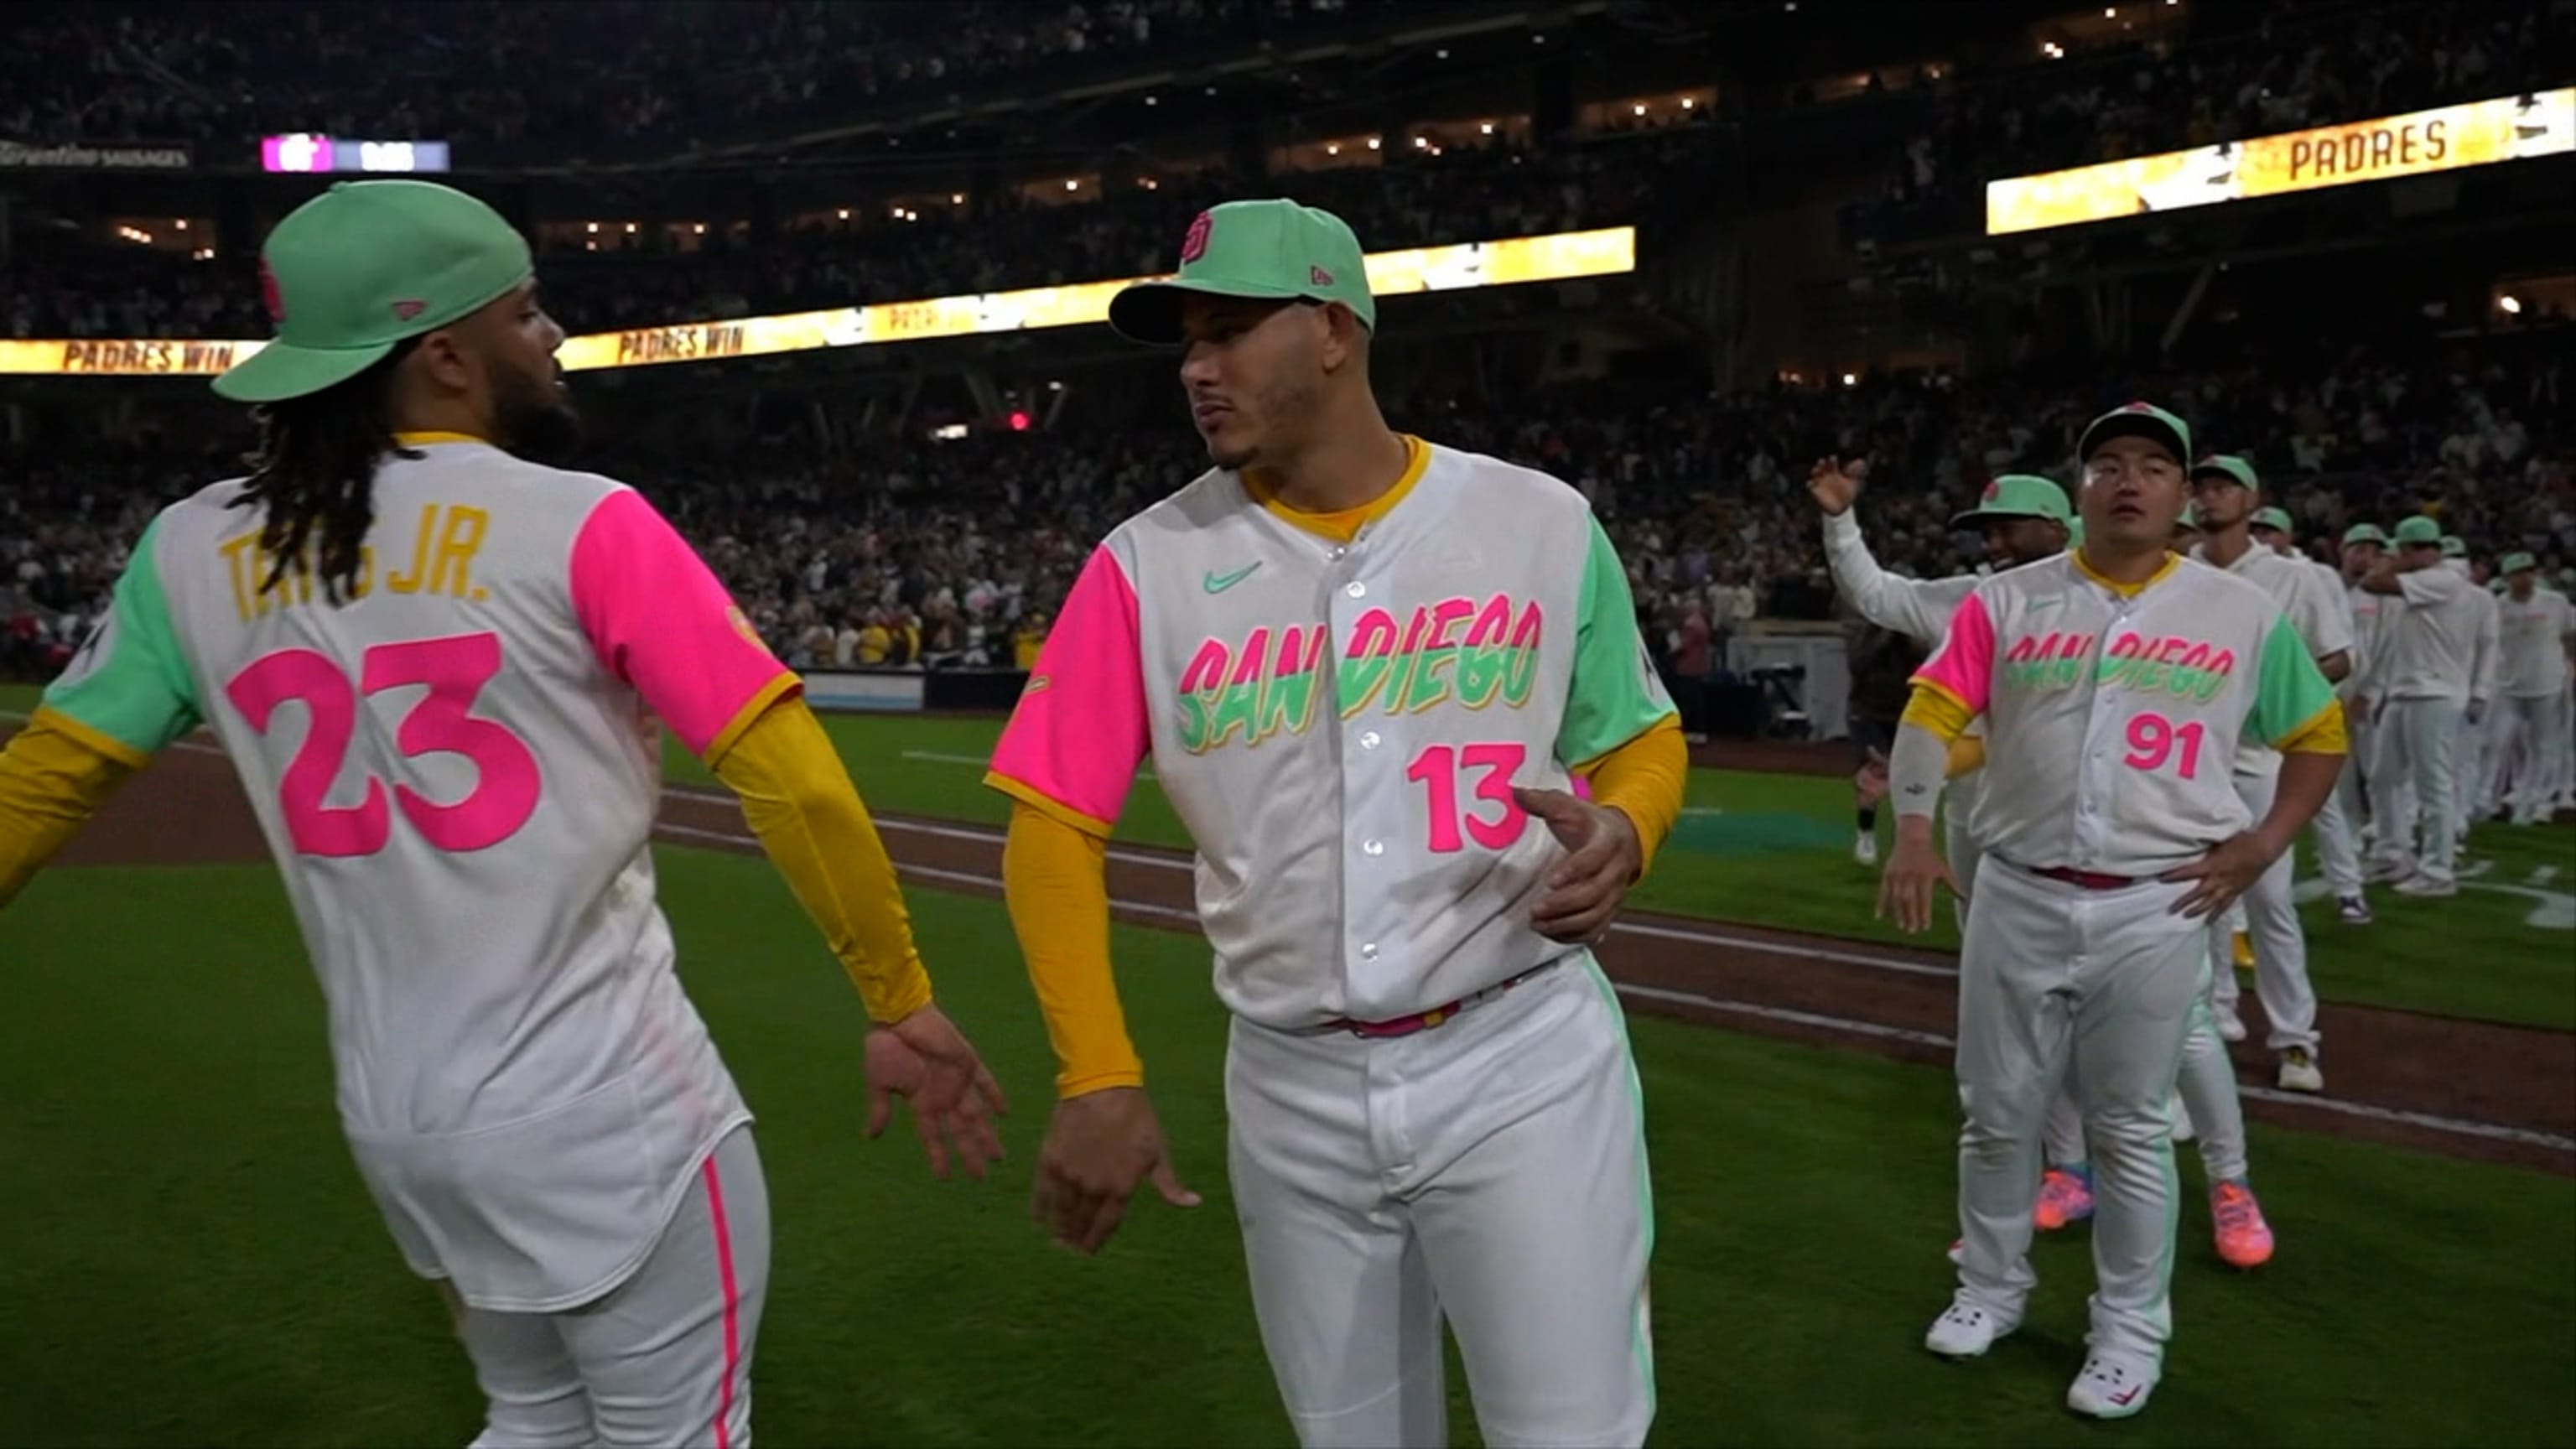 san diego padres pink and green uniforms